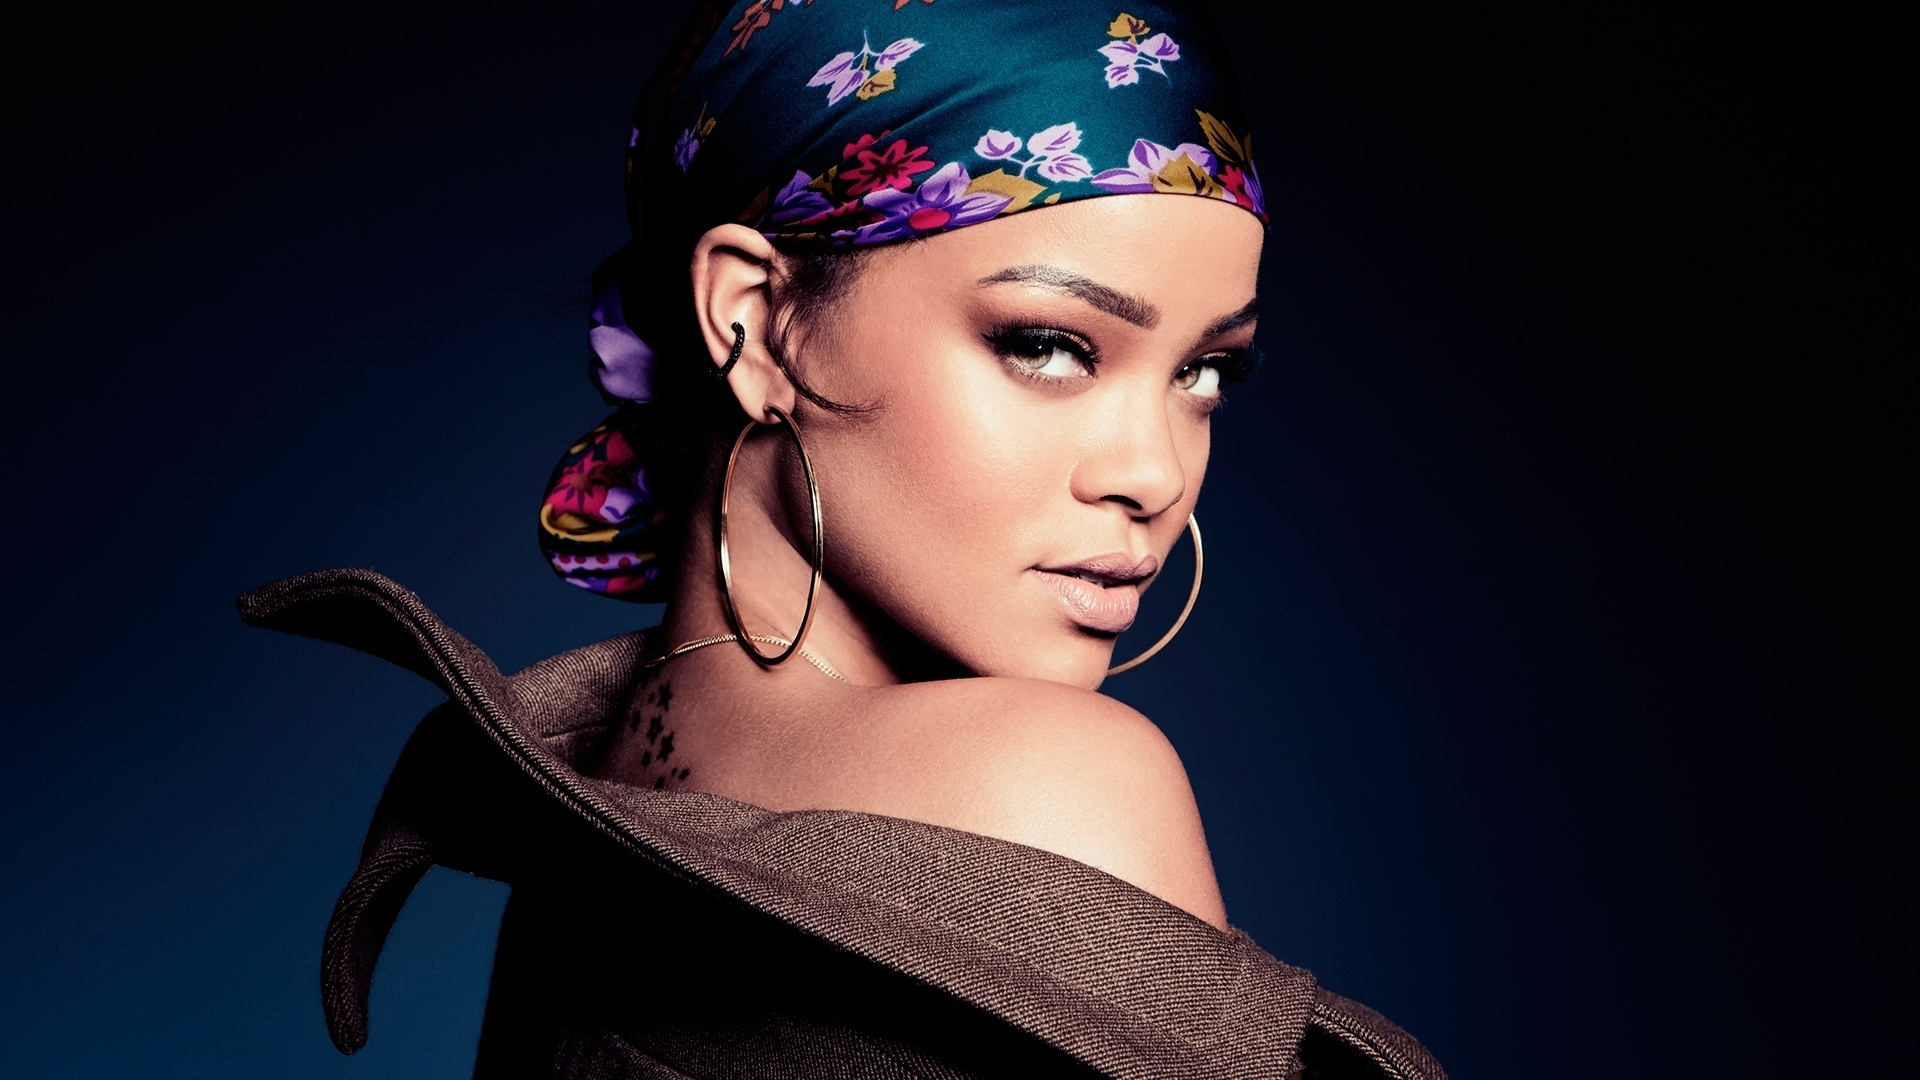 Rihanna Wallpapers and Backgrounds - WallpaperCG